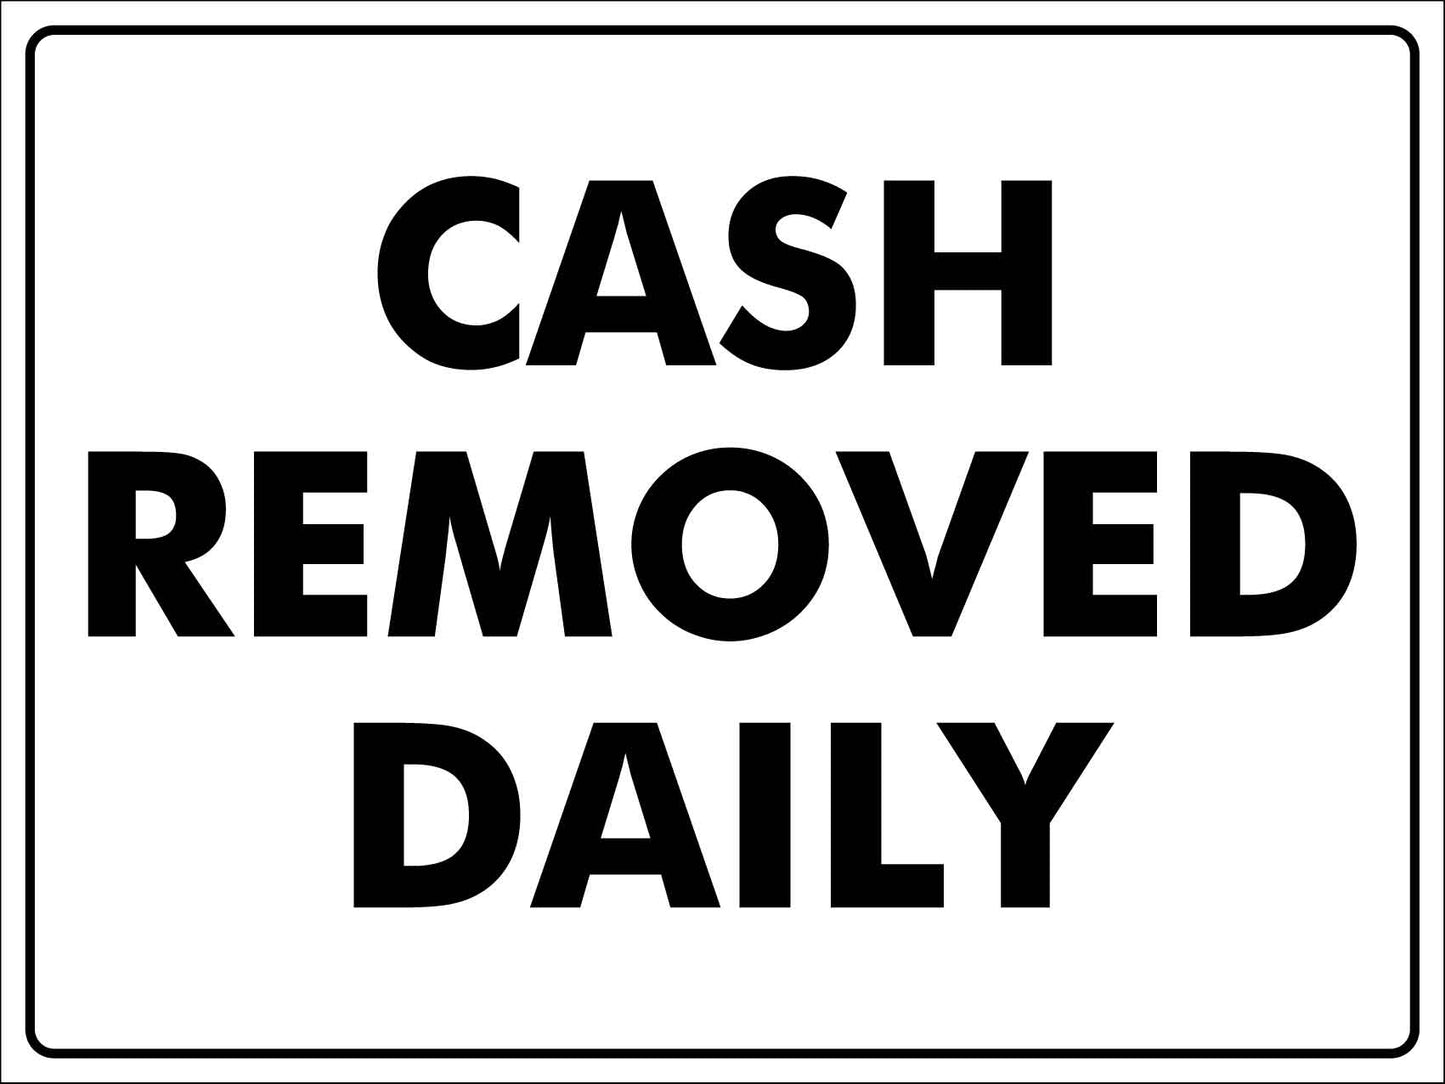 Cash Removed Daily Sign